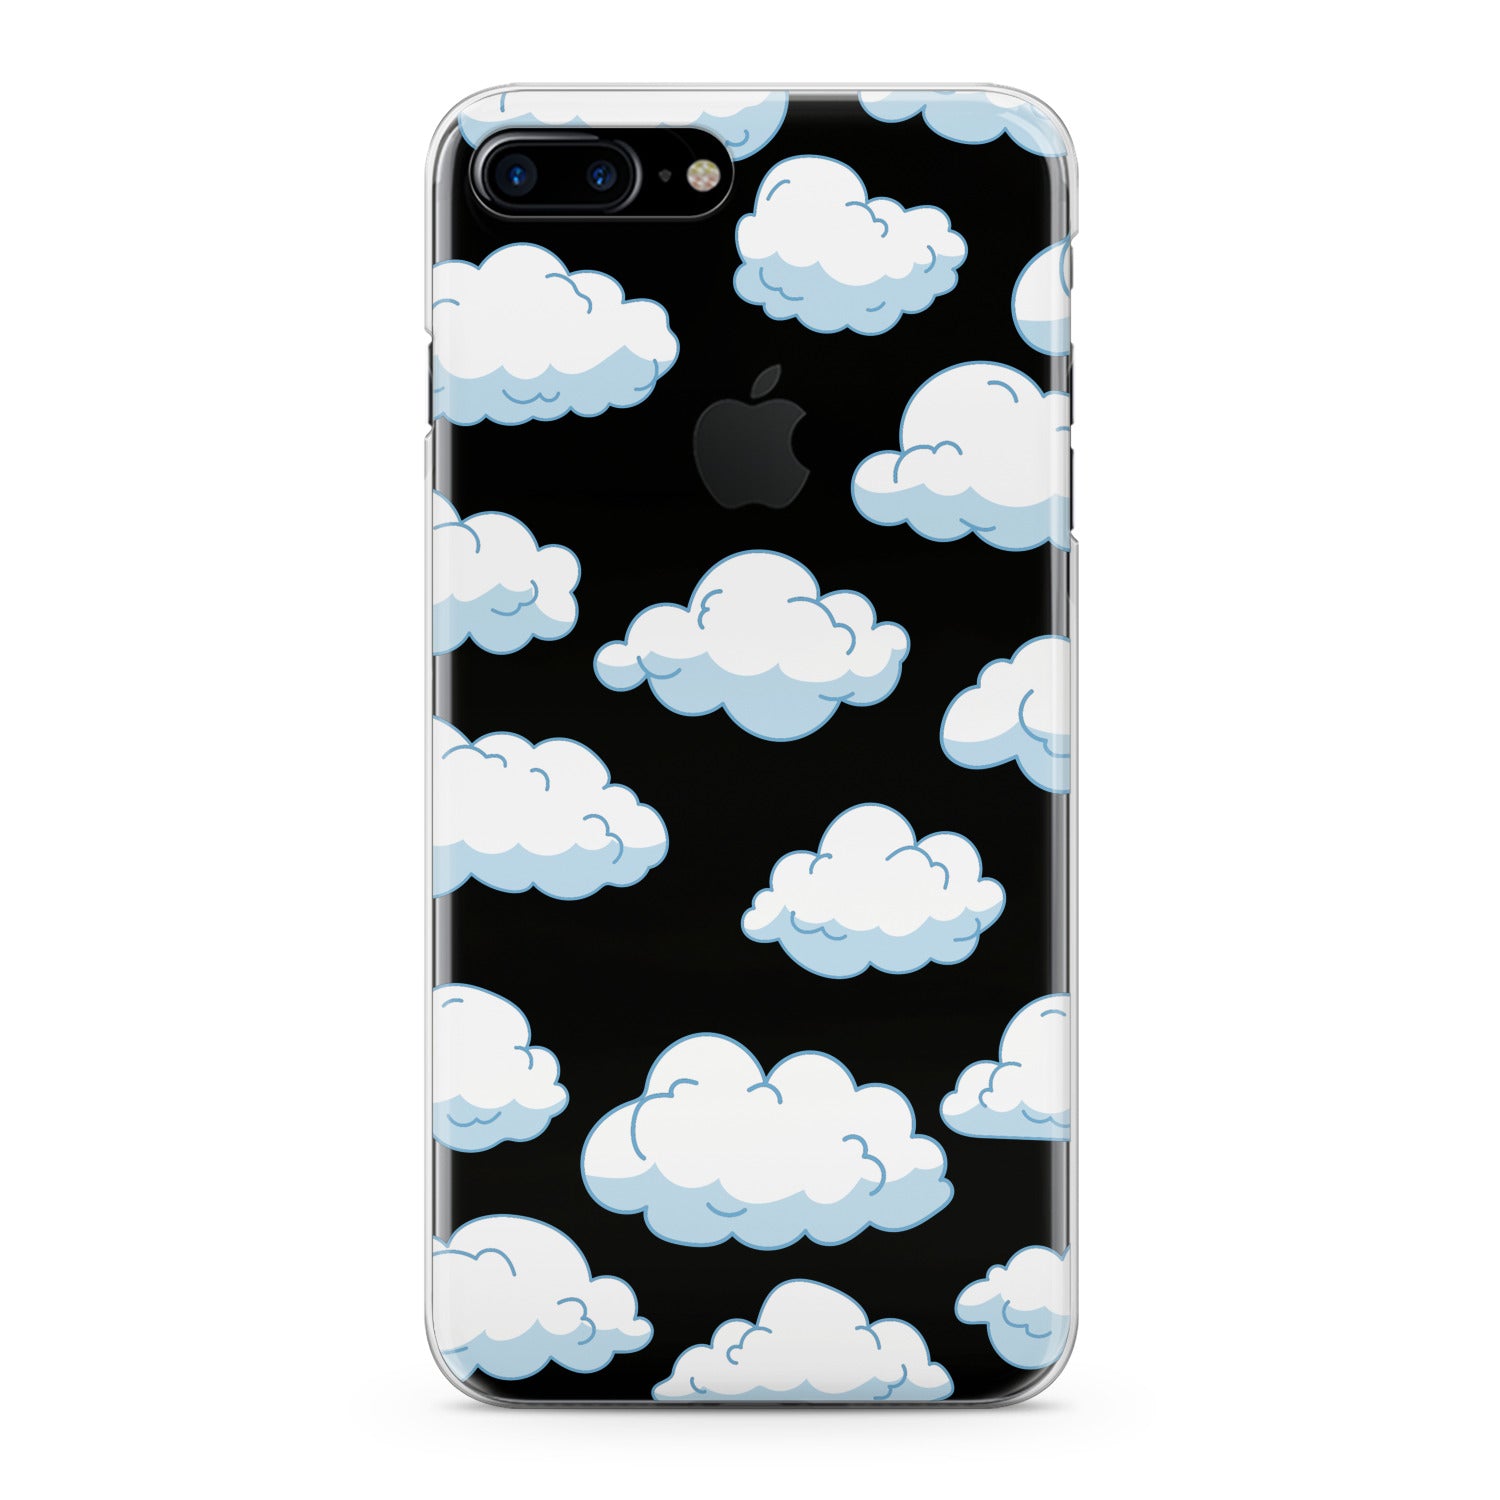 Lex Altern Clouds Pattern Phone Case for your iPhone & Android phone.